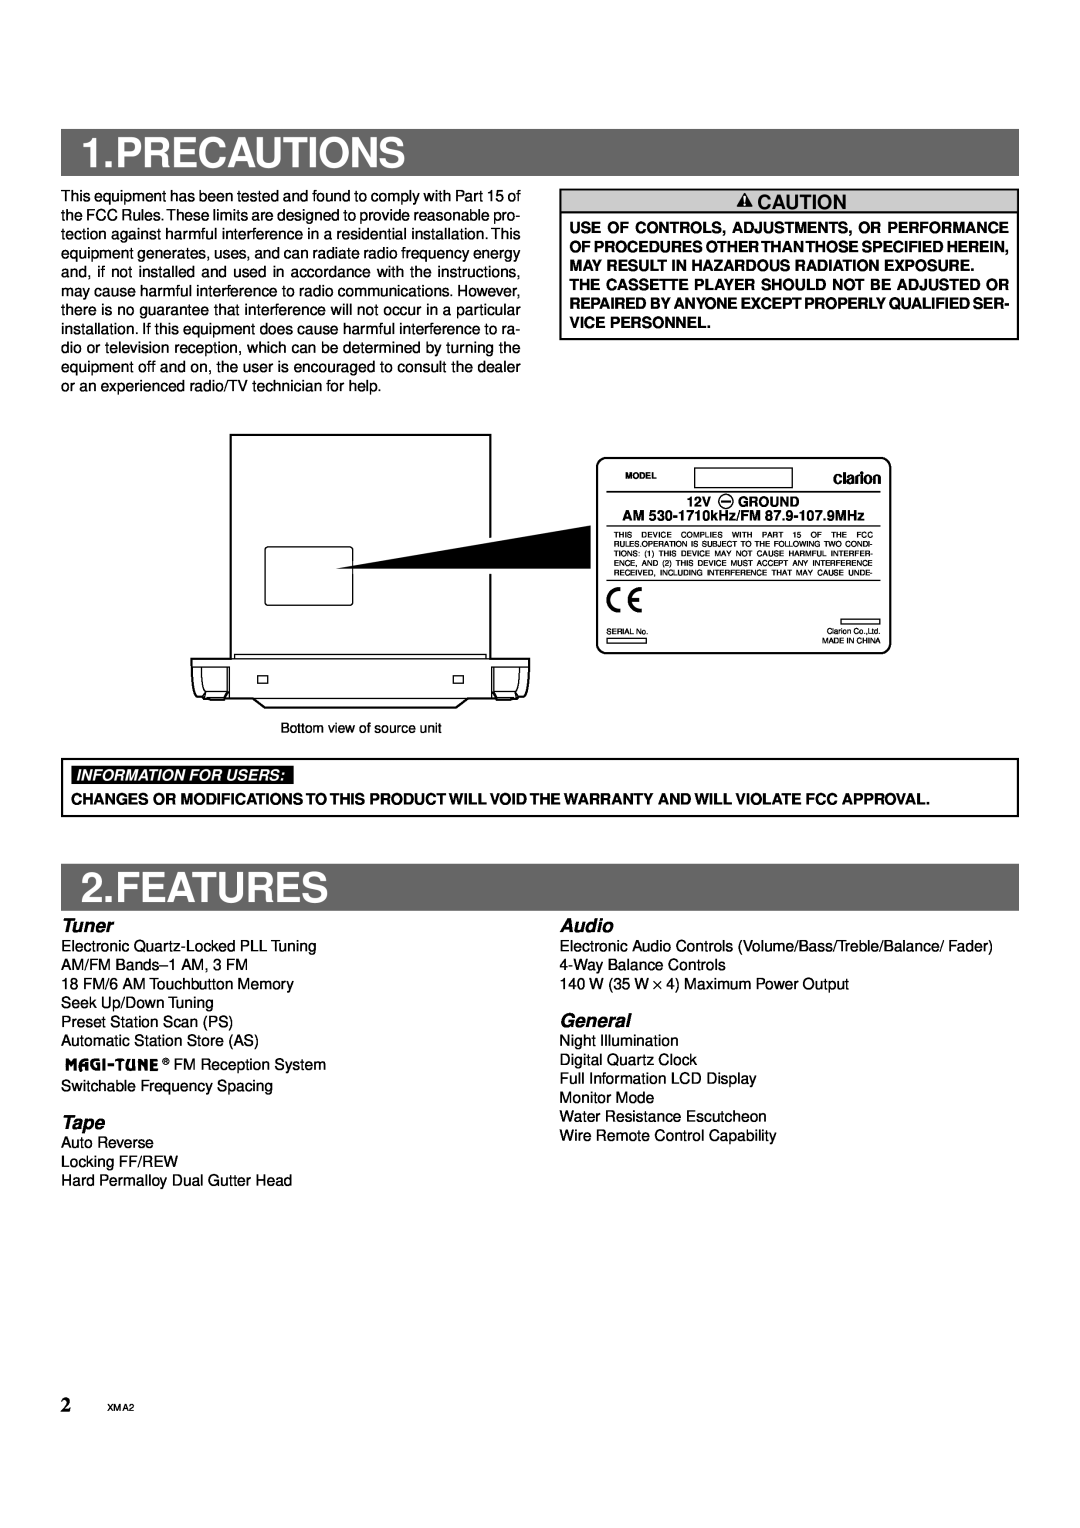 Clarion XMA2 owner manual Precautions, Features, Tuner, Audio, General, Tape, Information For Users 